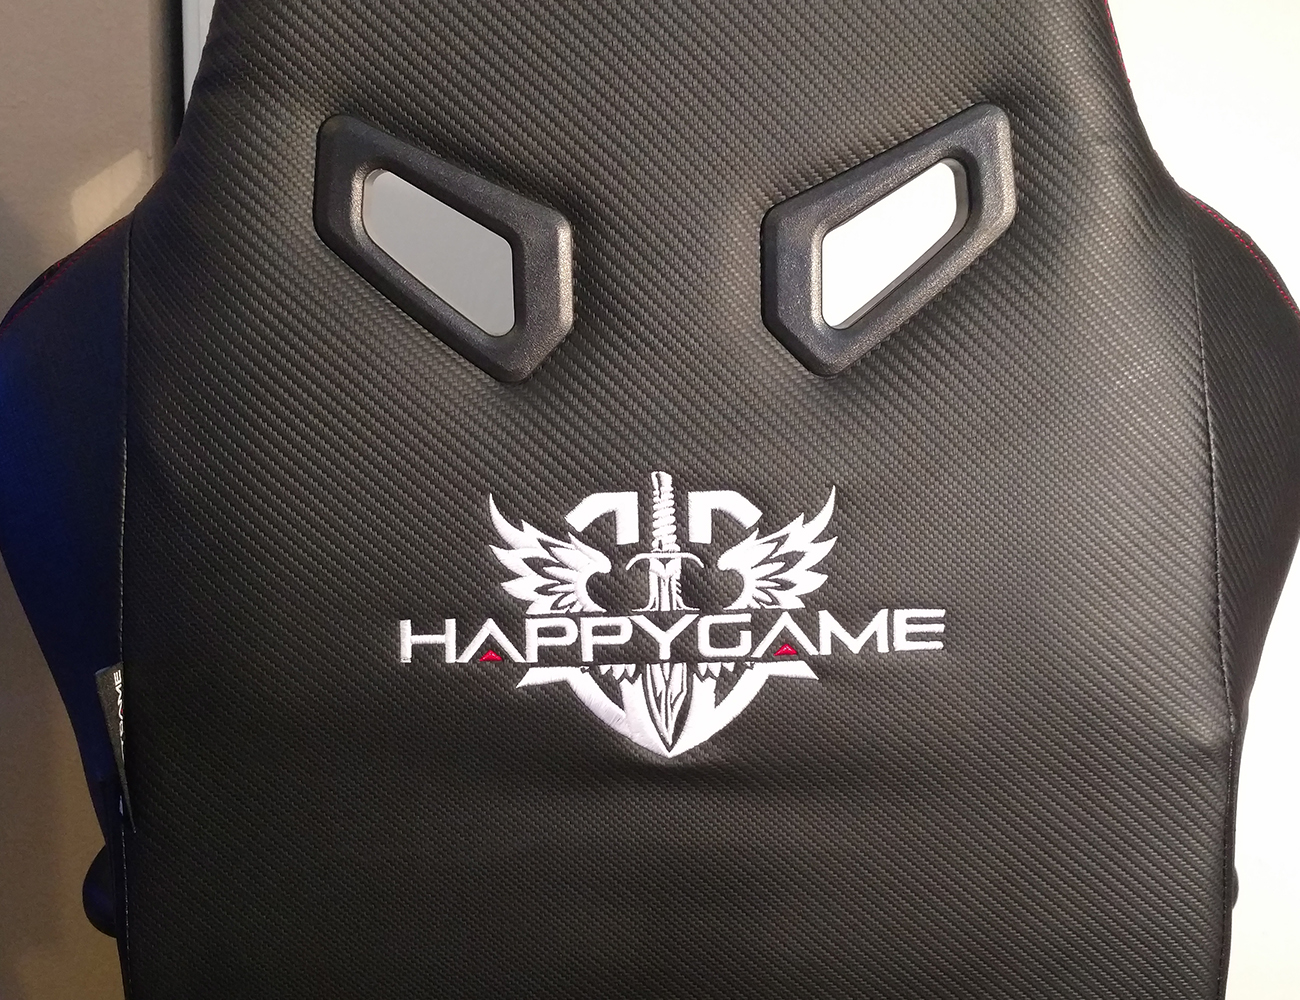 HAPPYGAME Multifunctional Computer Gaming Chair Review